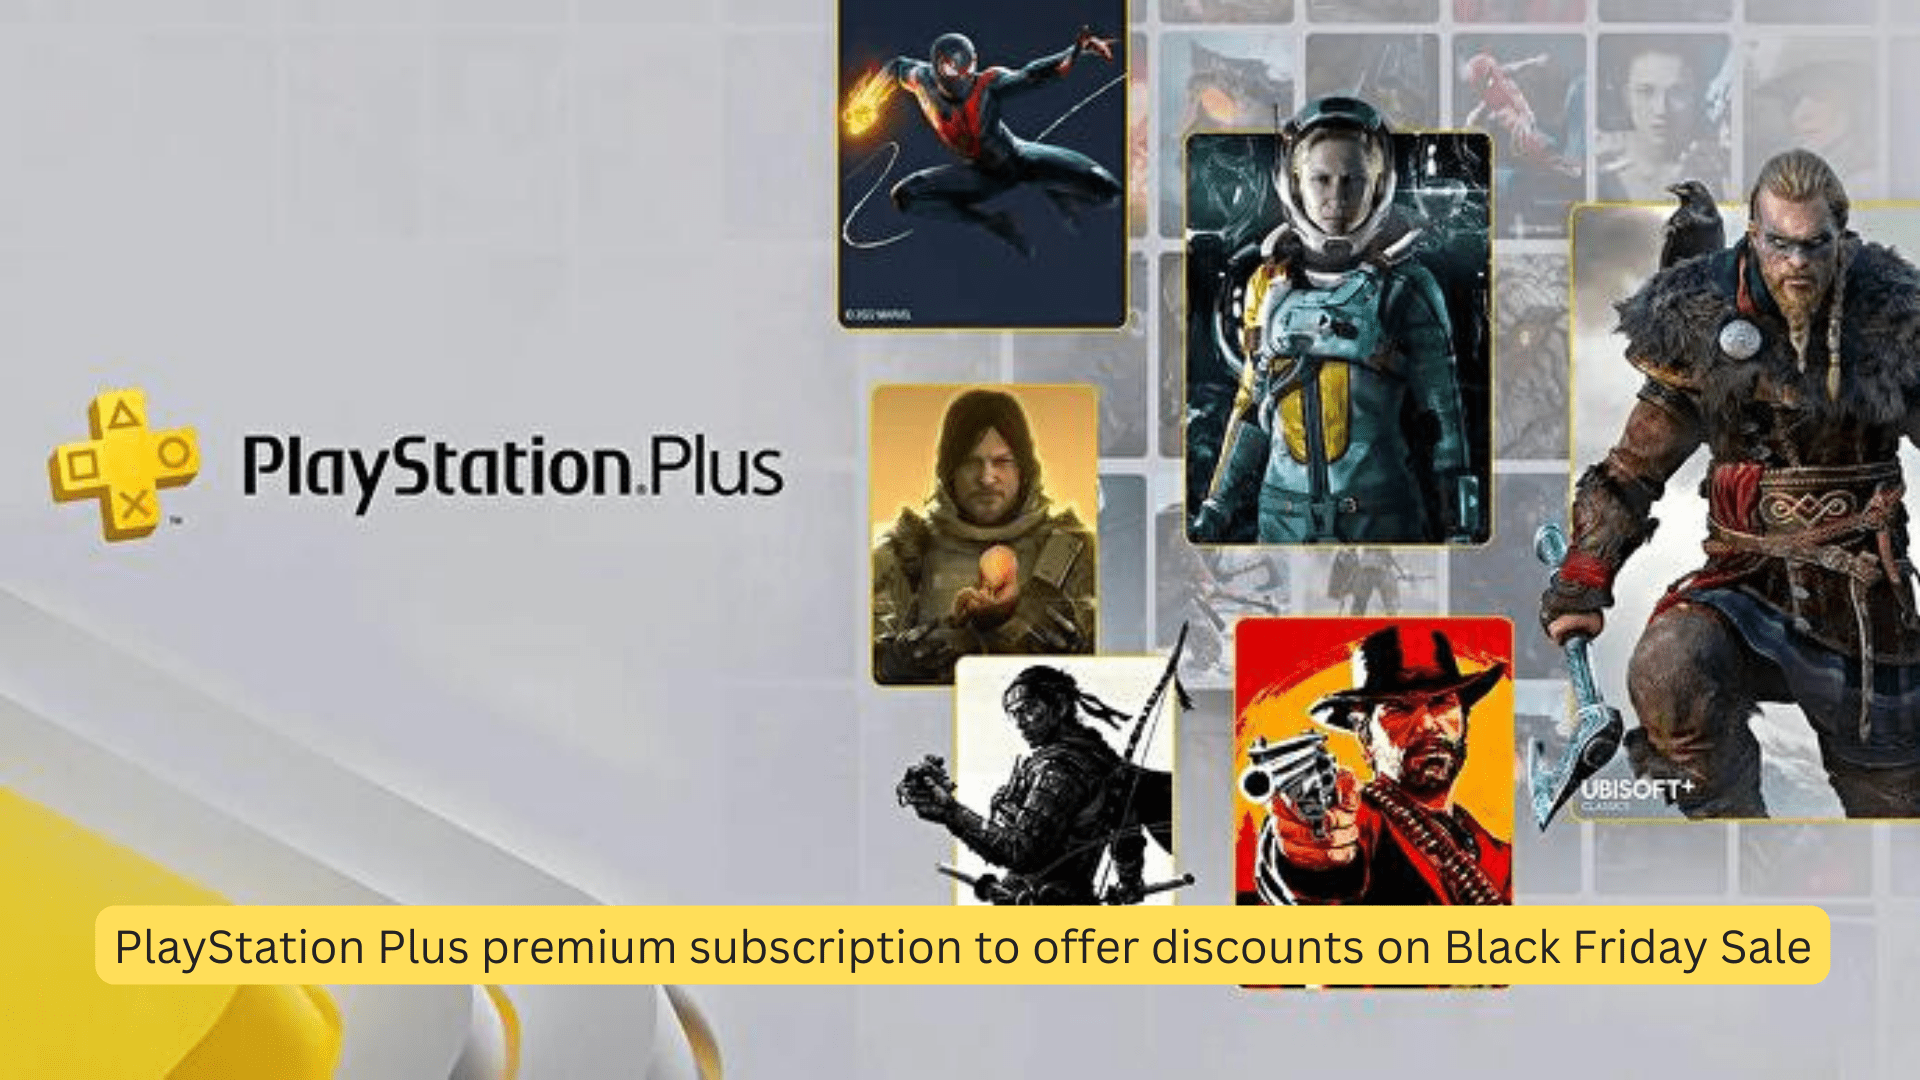 PlayStation Plus premium subscription to offer discounts on Black Friday Sale